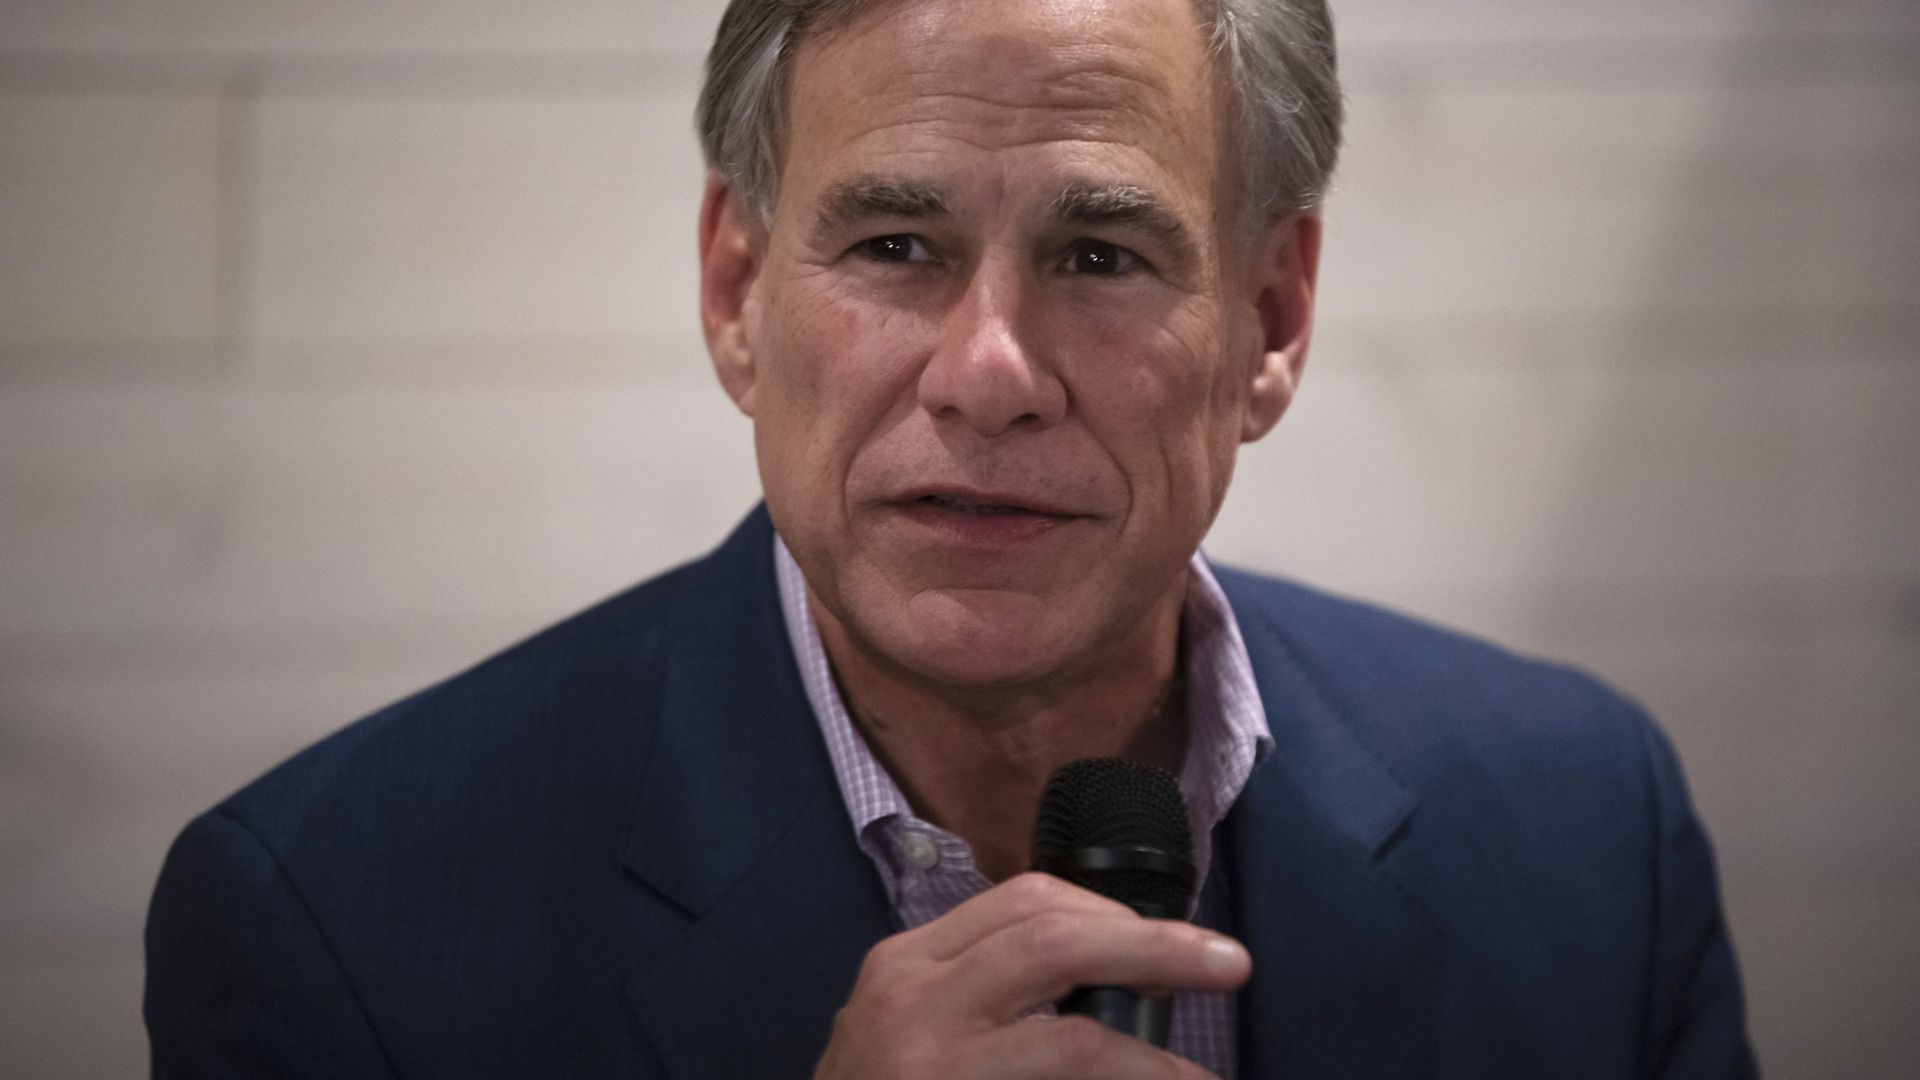 Greg Abbott, governor of Texas, speaks during a Get Out The Vote campaign event in Beaumont, Texas, U.S., on Thursday, Feb. 17, 2022.